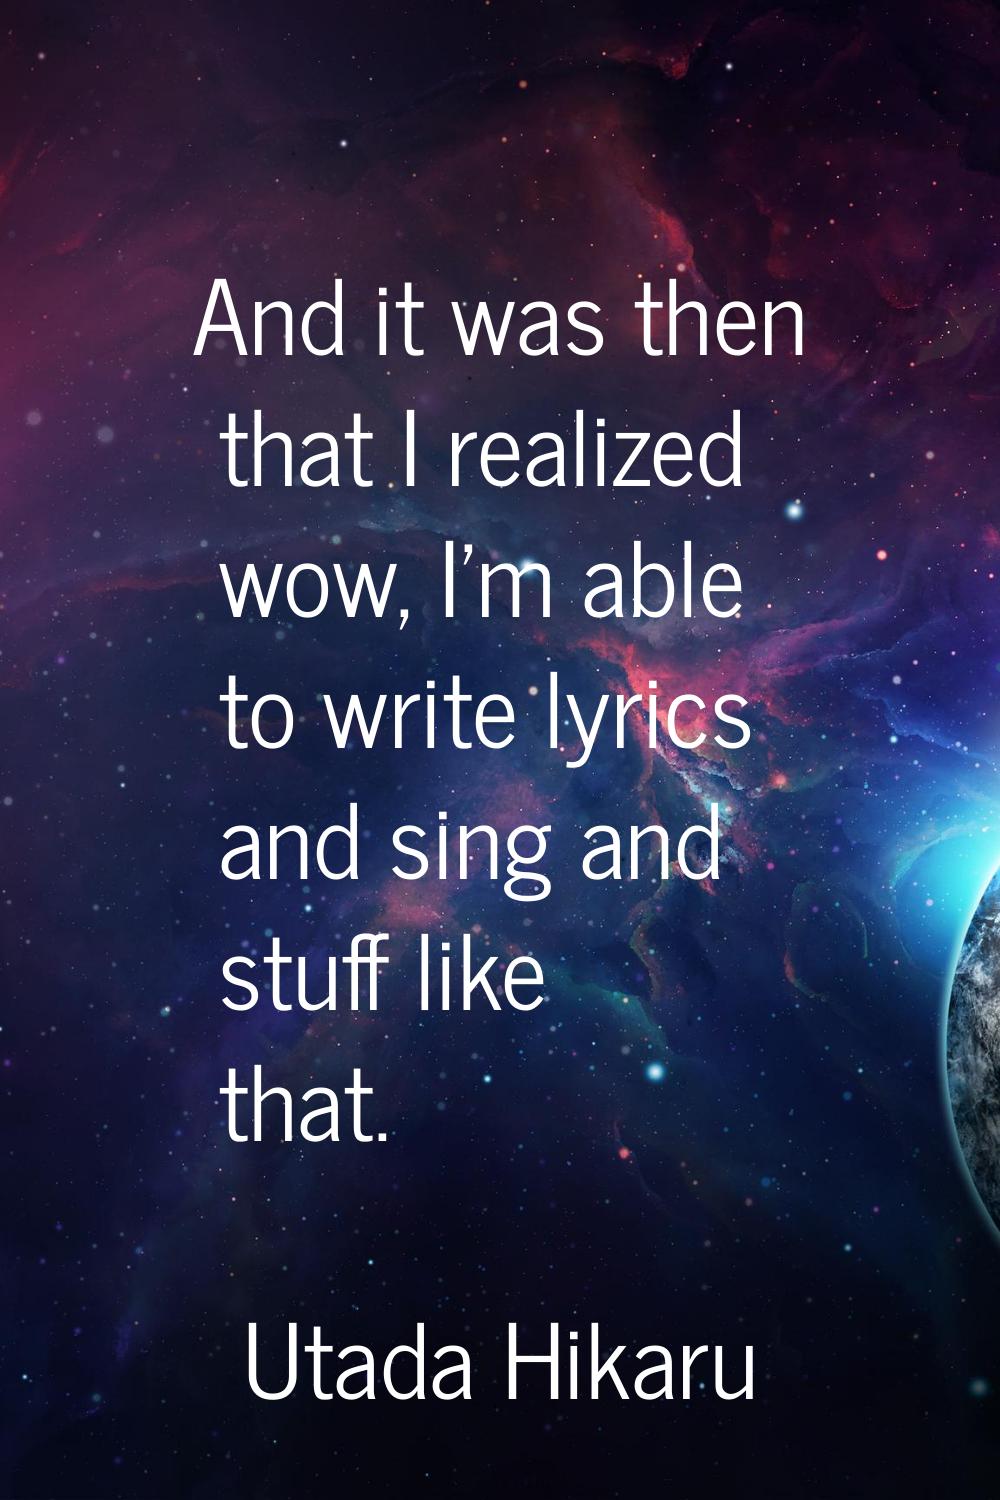 And it was then that I realized wow, I'm able to write lyrics and sing and stuff like that.